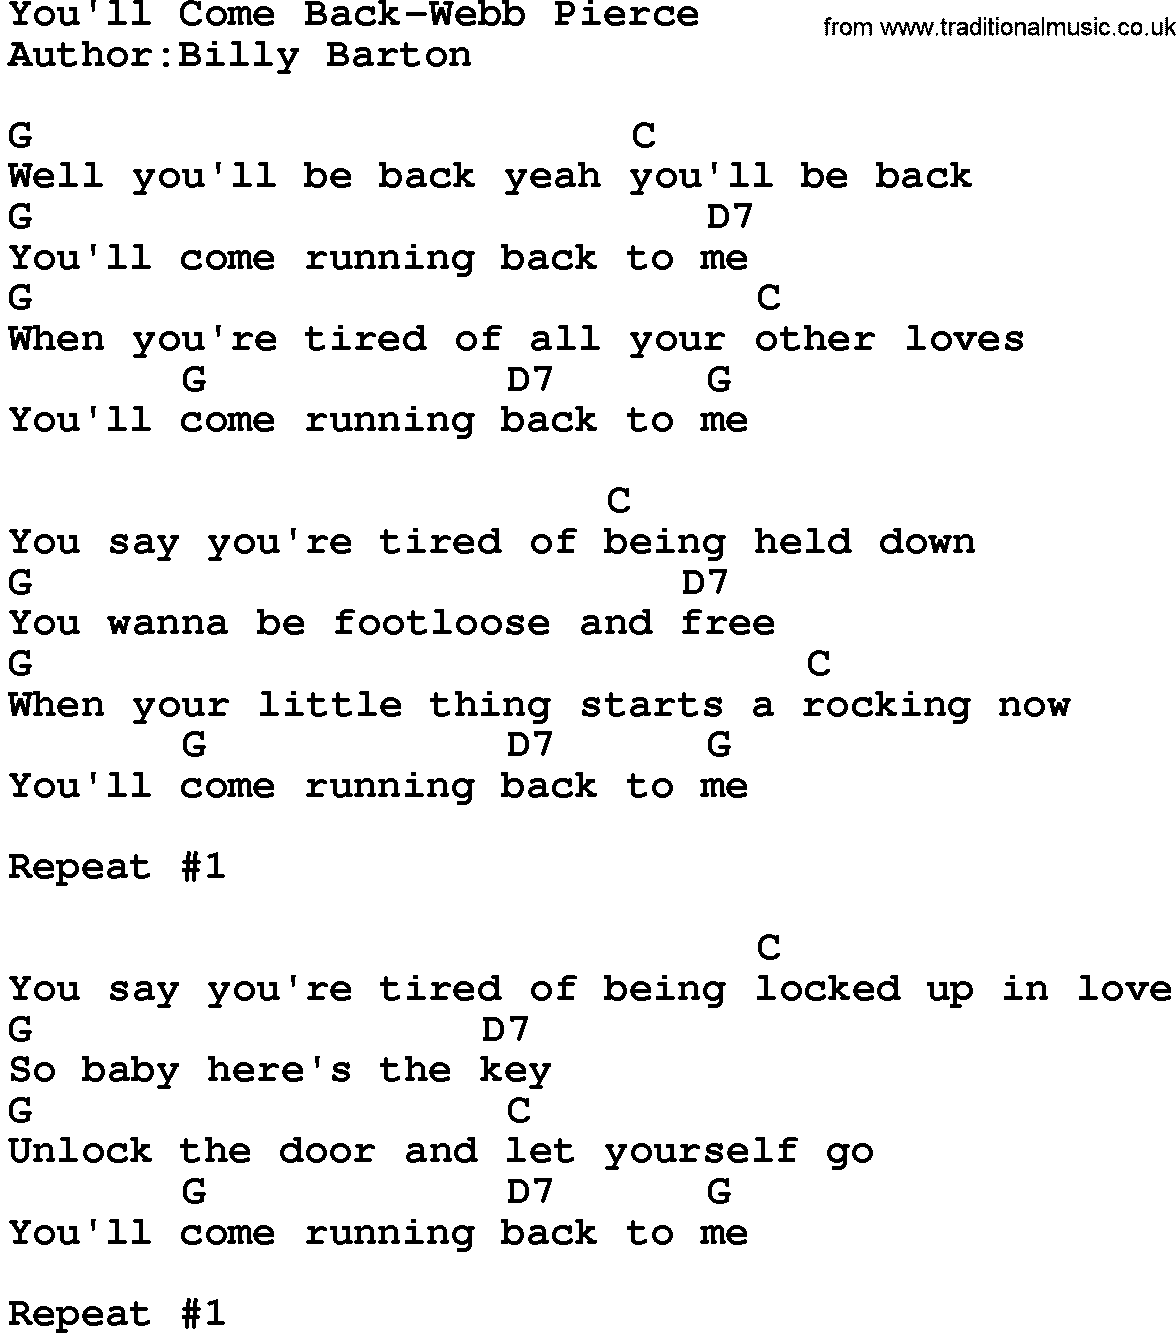 Country music song: You'll Come Back-Webb Pierce lyrics and chords